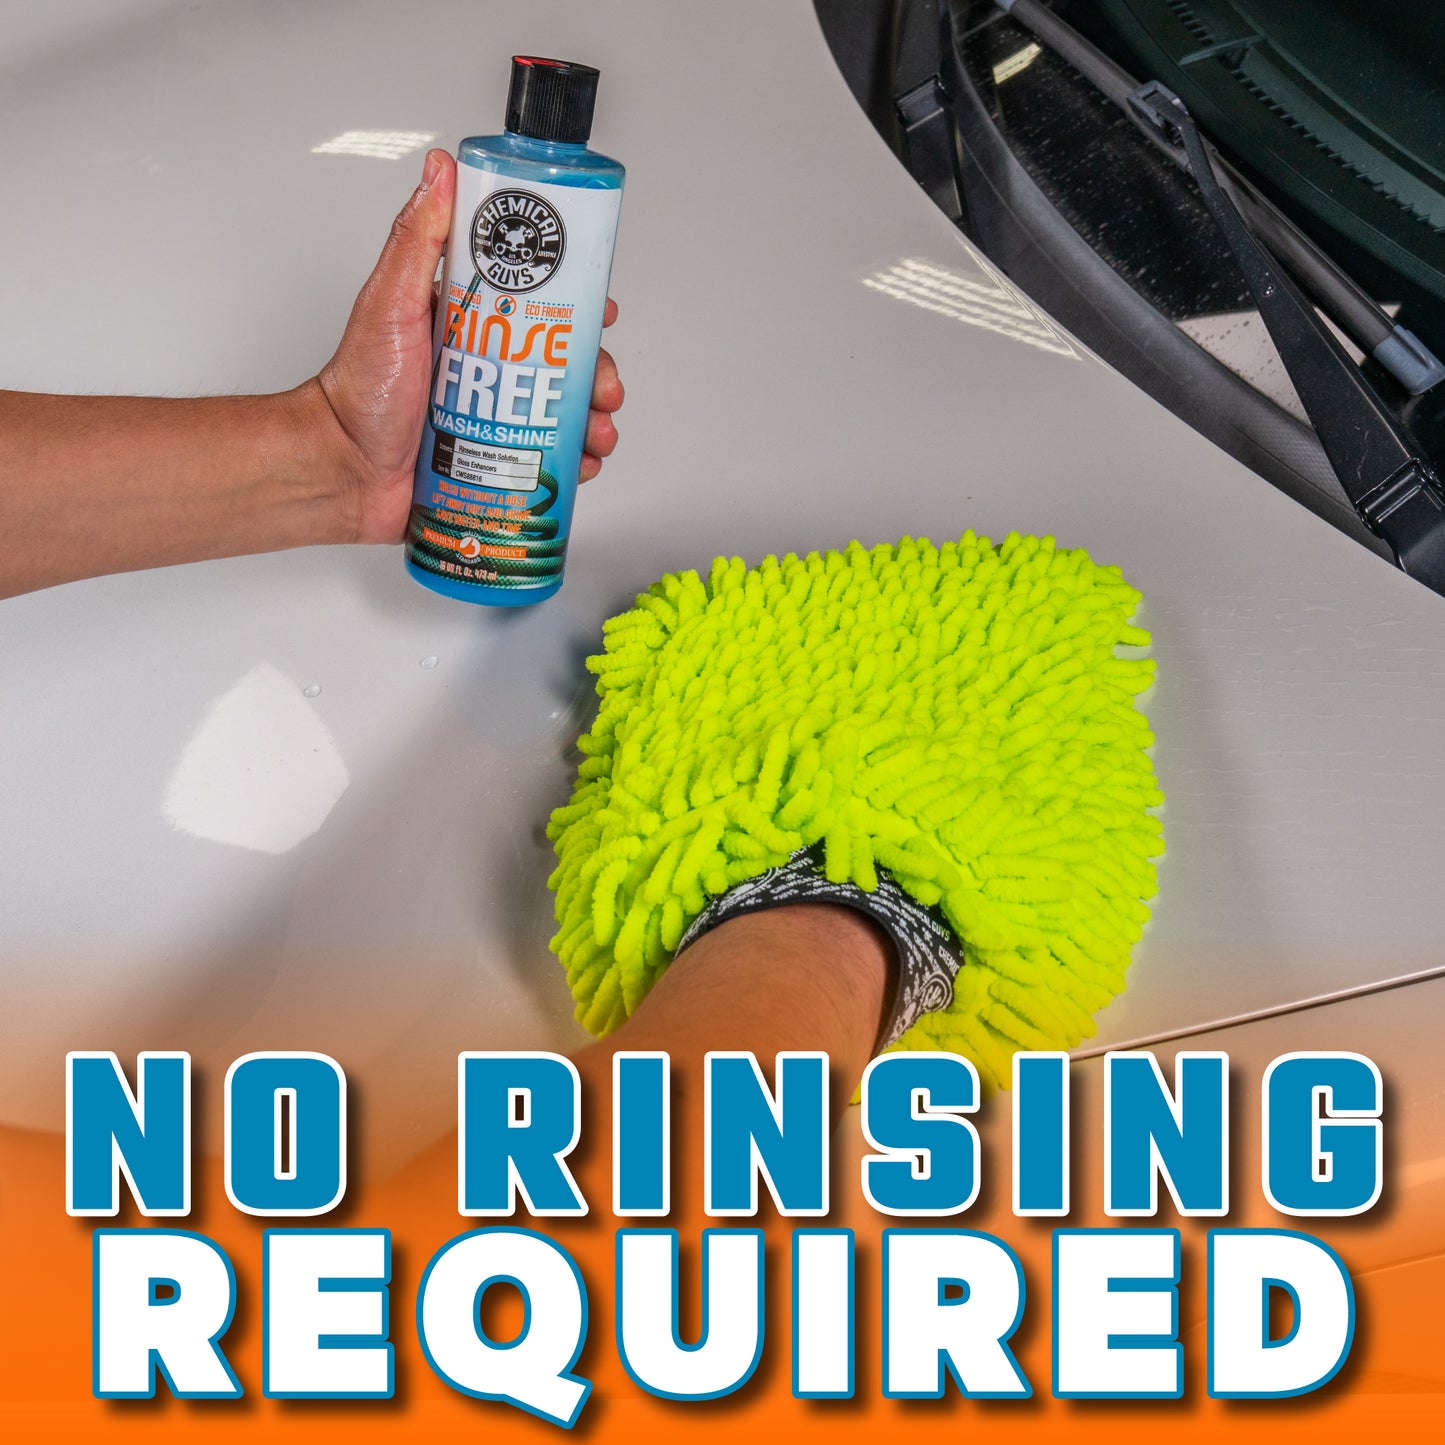 Rinse Free Wash And Shine Complete Hoseless Car Wash